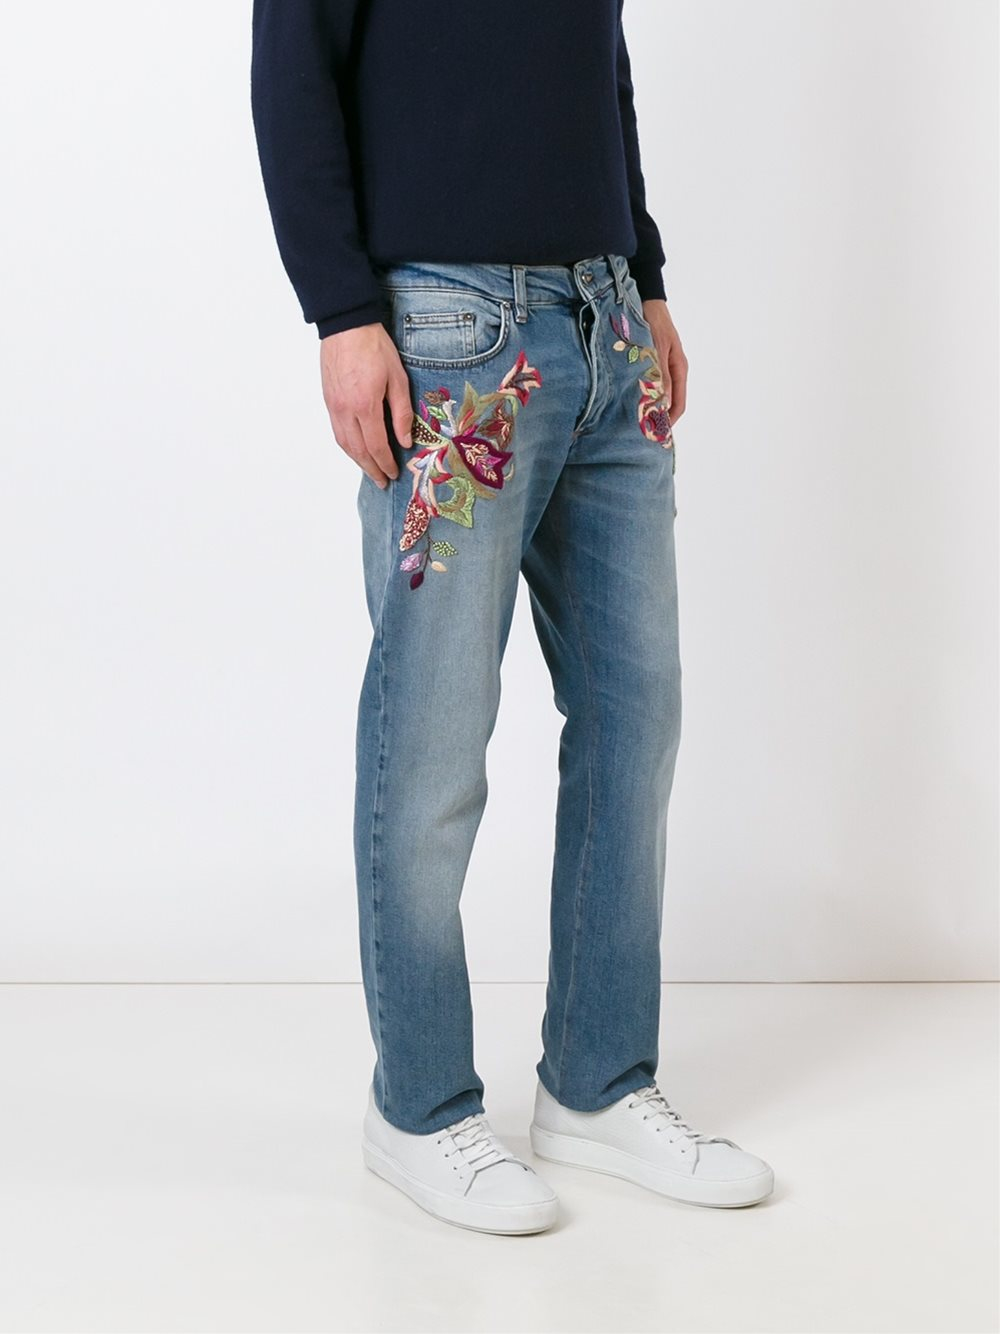 Lyst - Roberto Cavalli Embroidered Slim Fit Jeans in Blue for Men